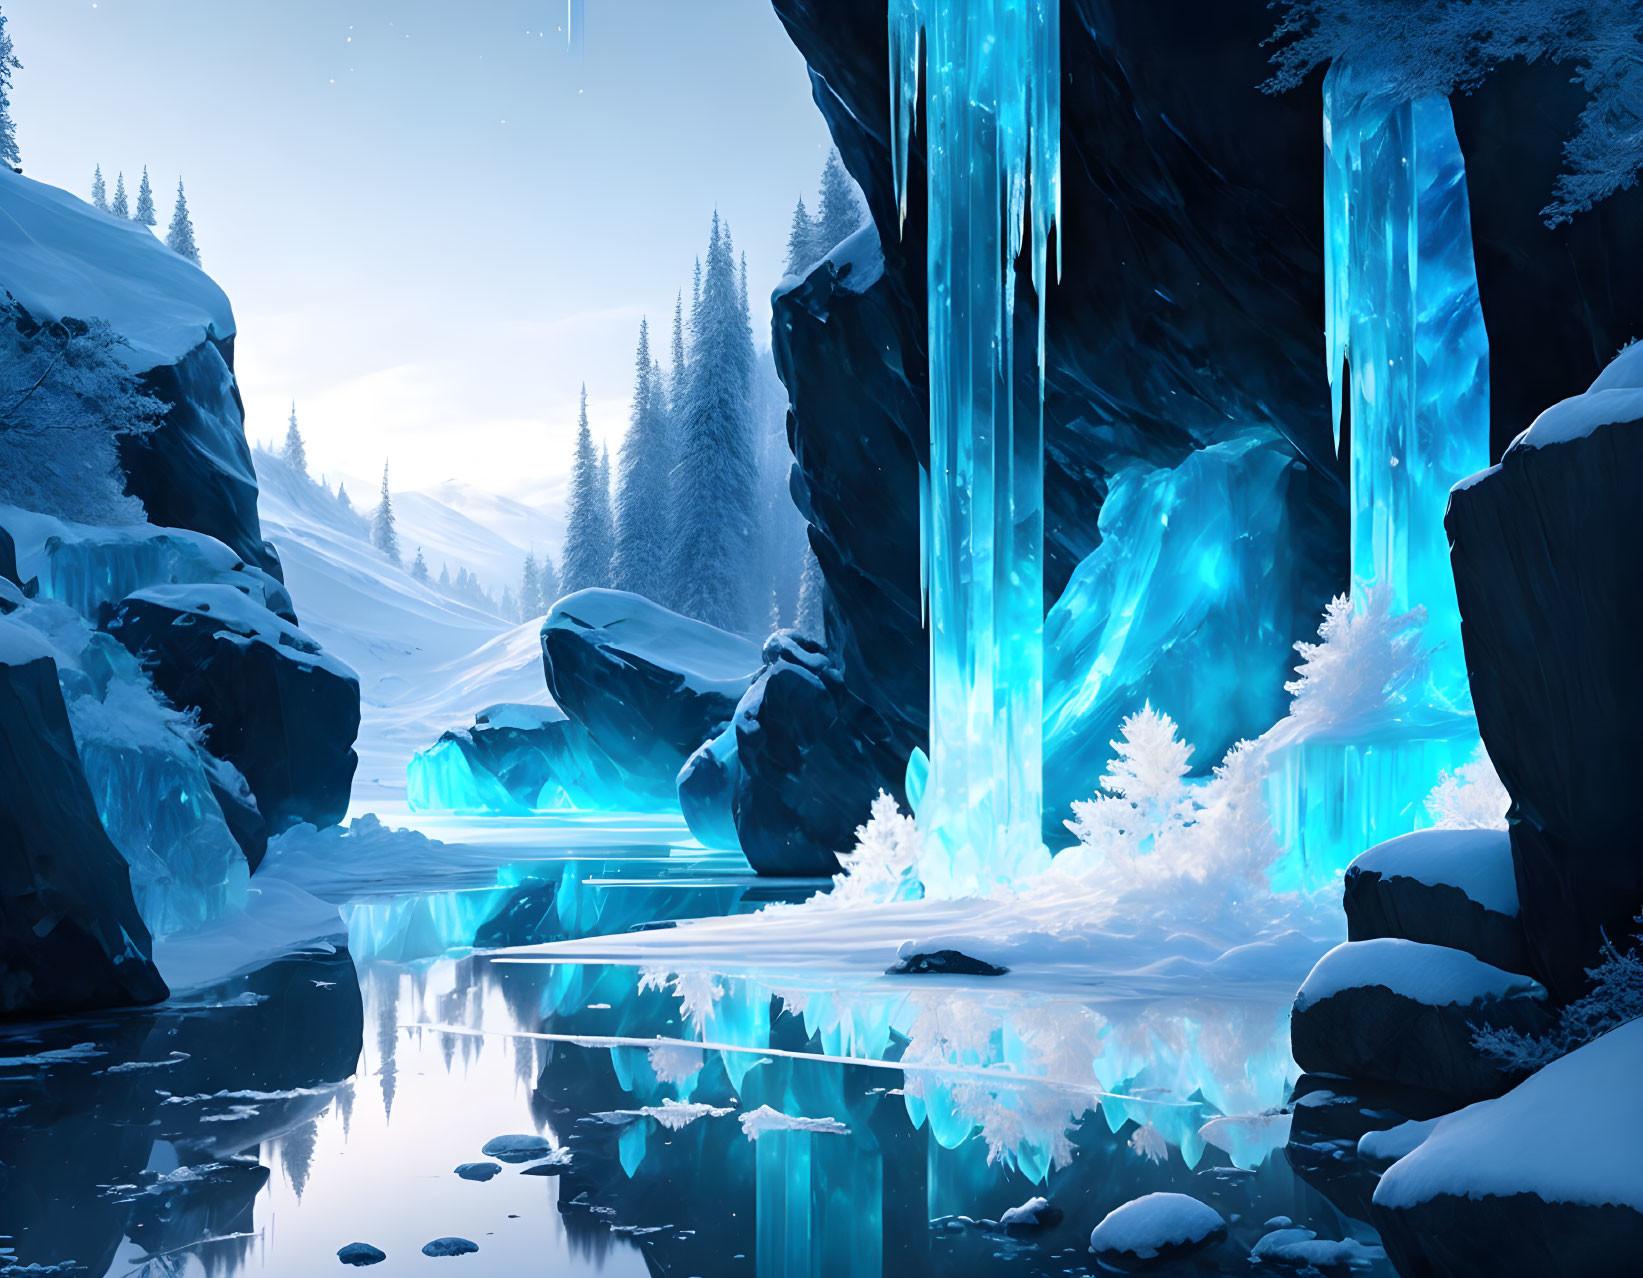 Winter landscape: frozen river, snow-covered rocks, glowing blue ice formations